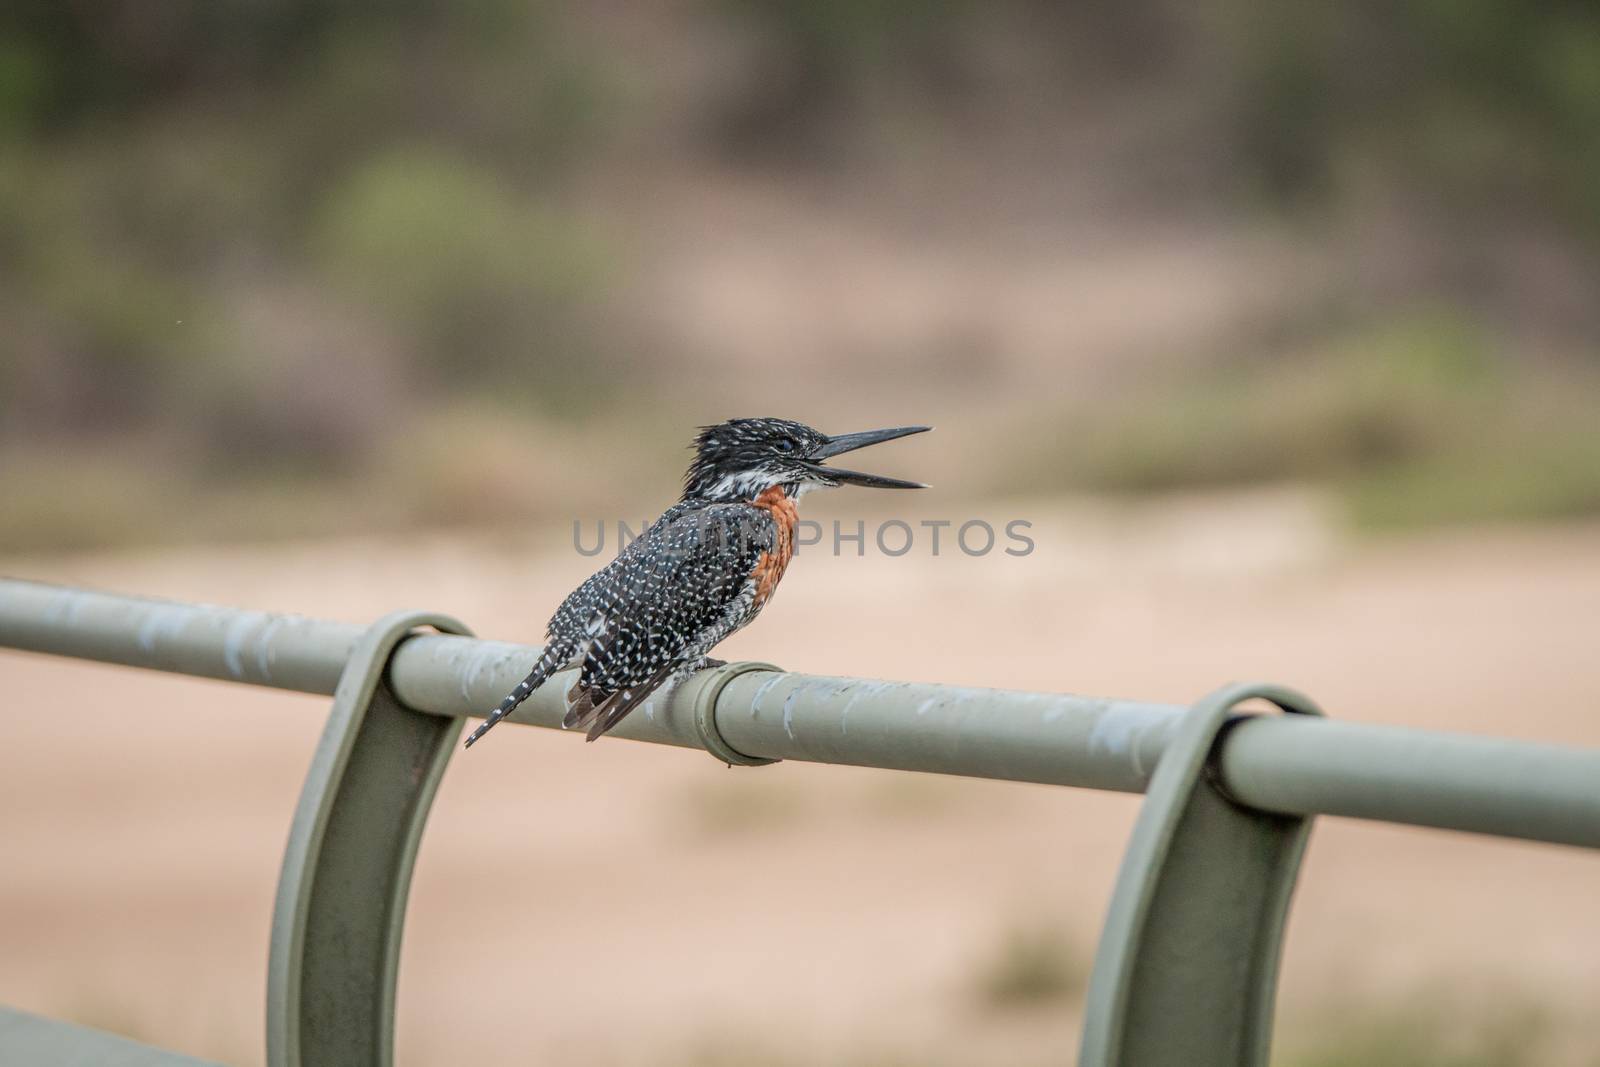 Giant kingfisher on a bridge in the Kruger National Park, South Africa.